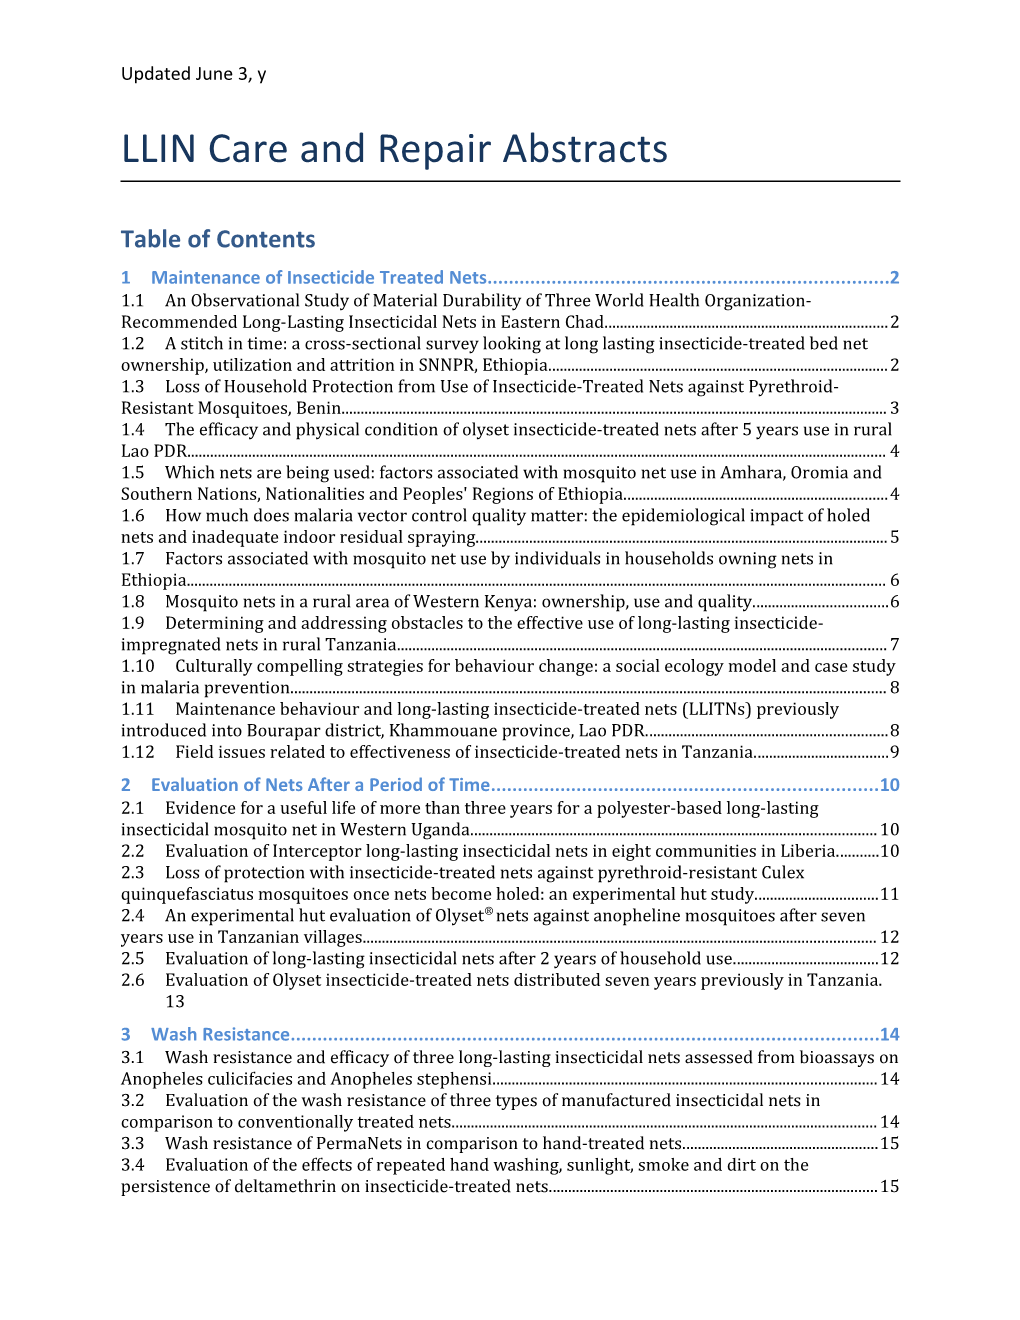 LLIN Care and Repair Abstracts